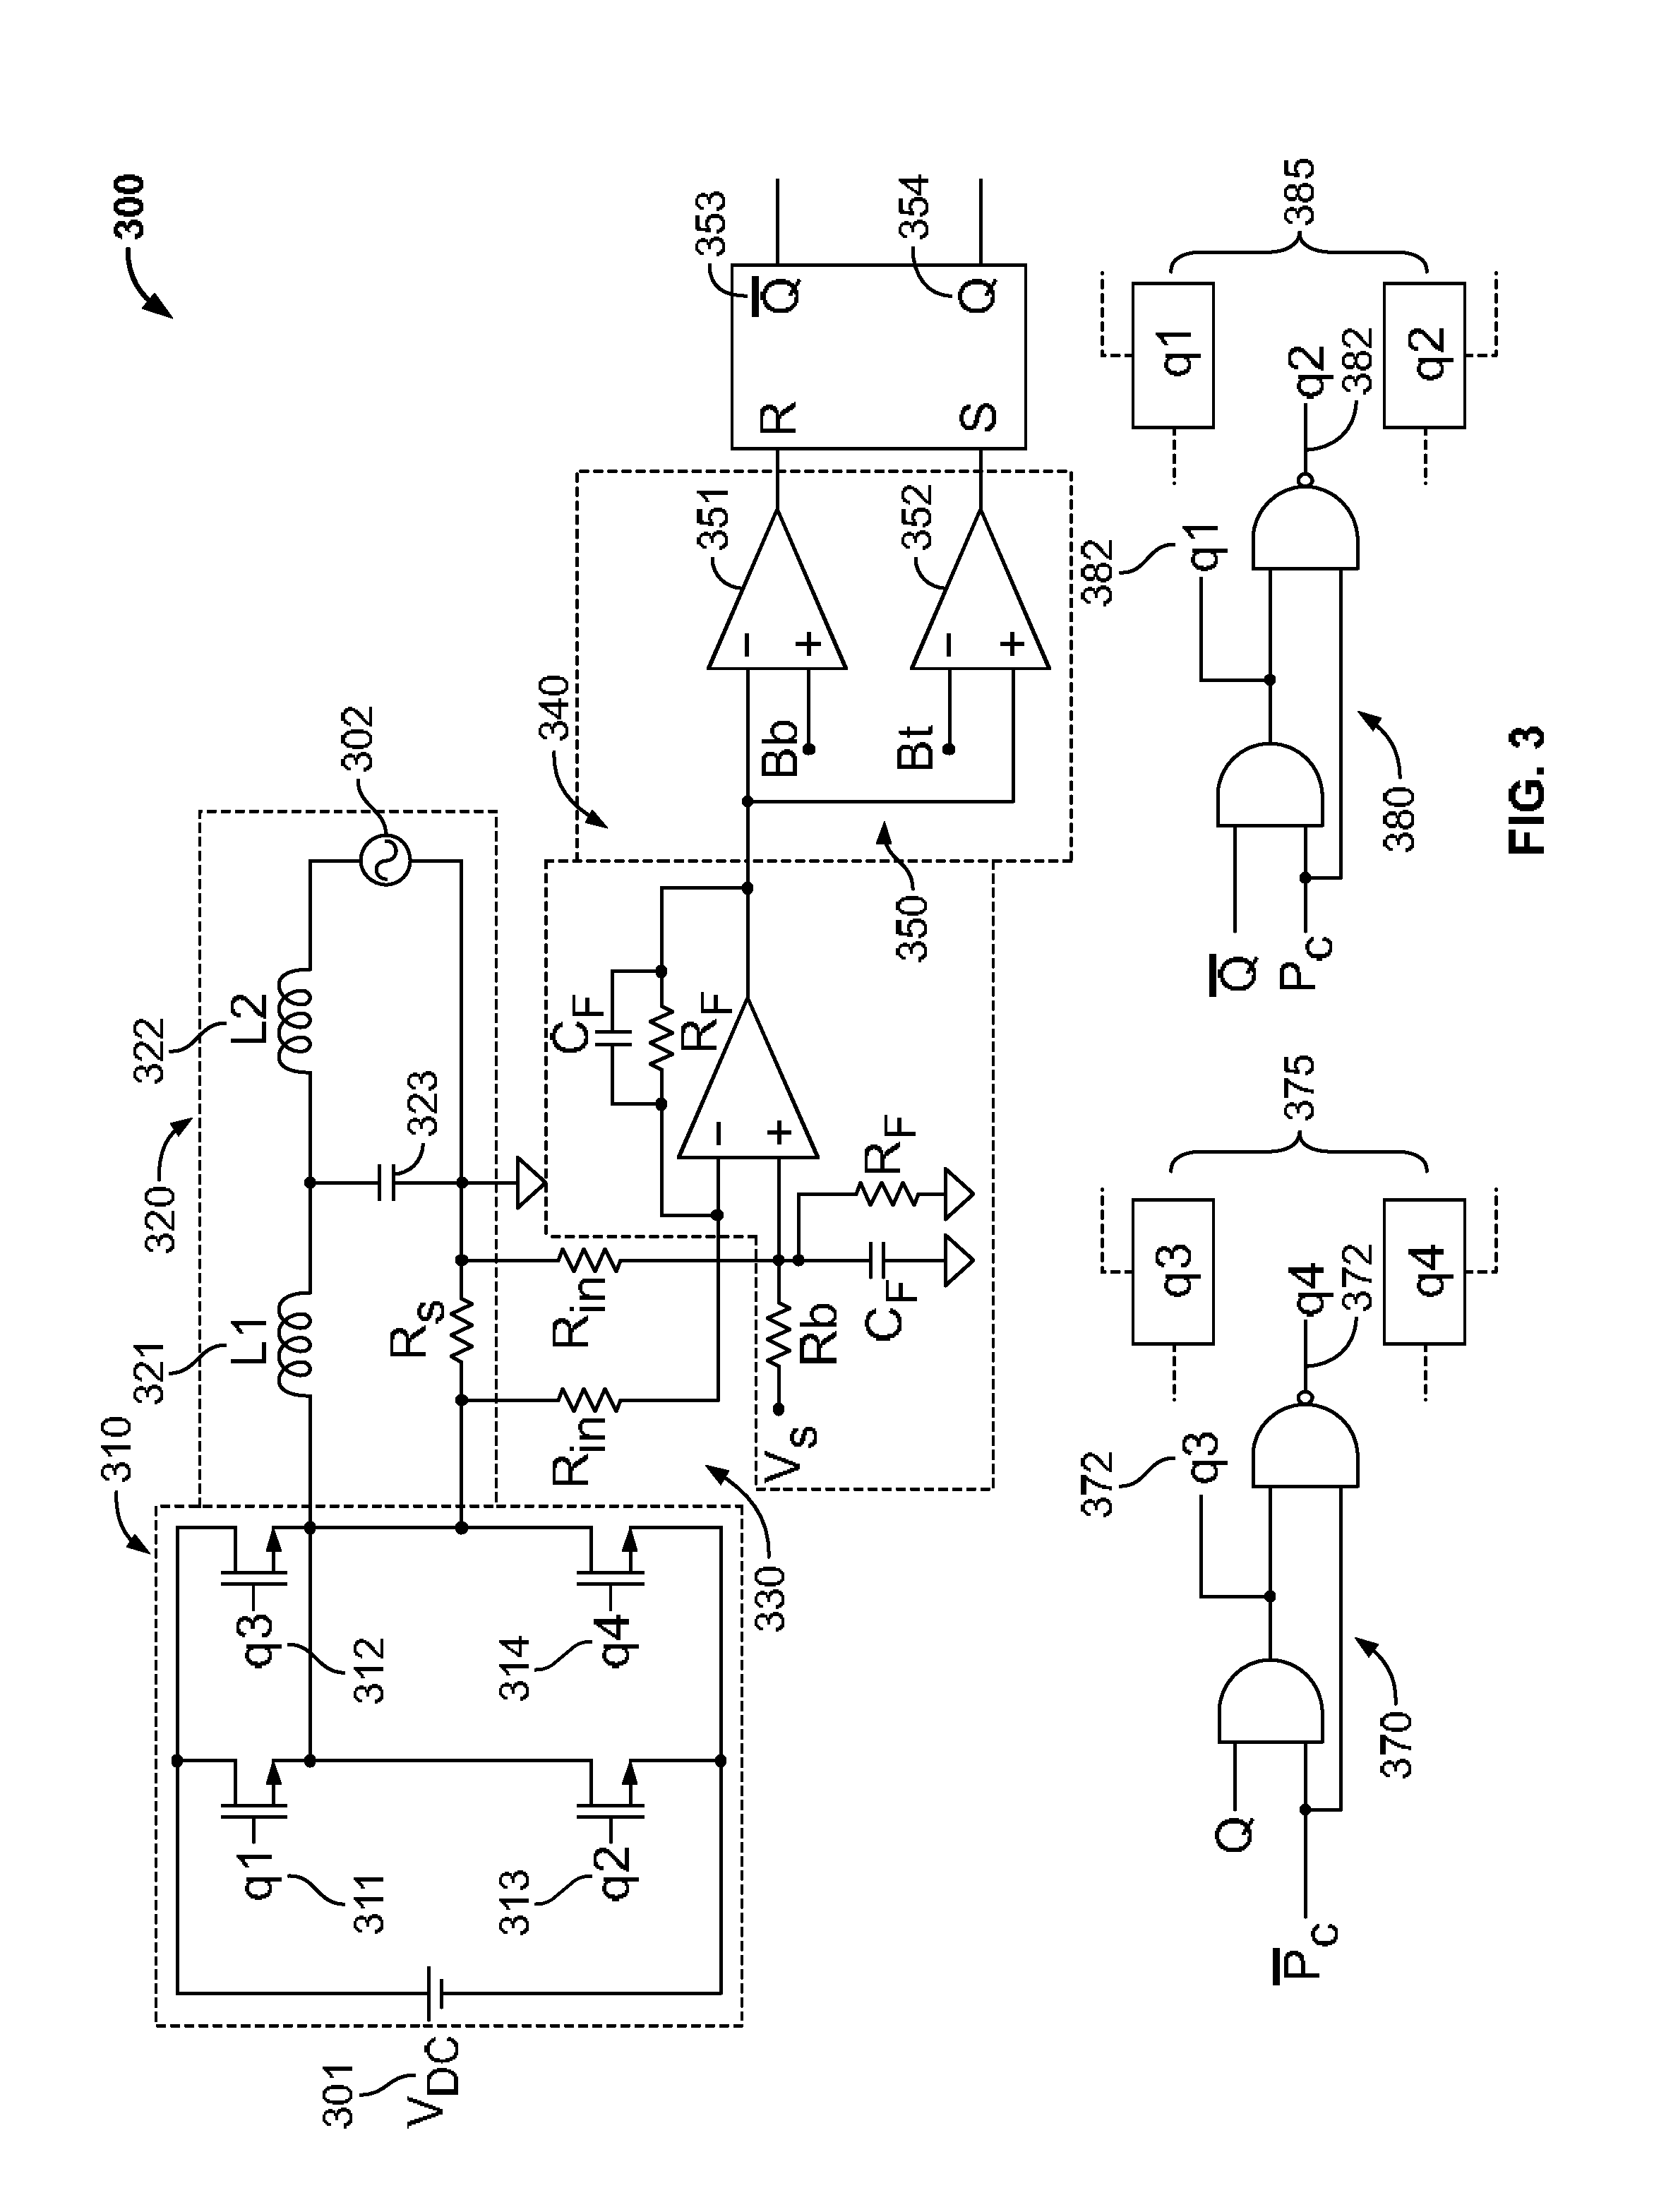 Variable duty cycle switching with imposed delay